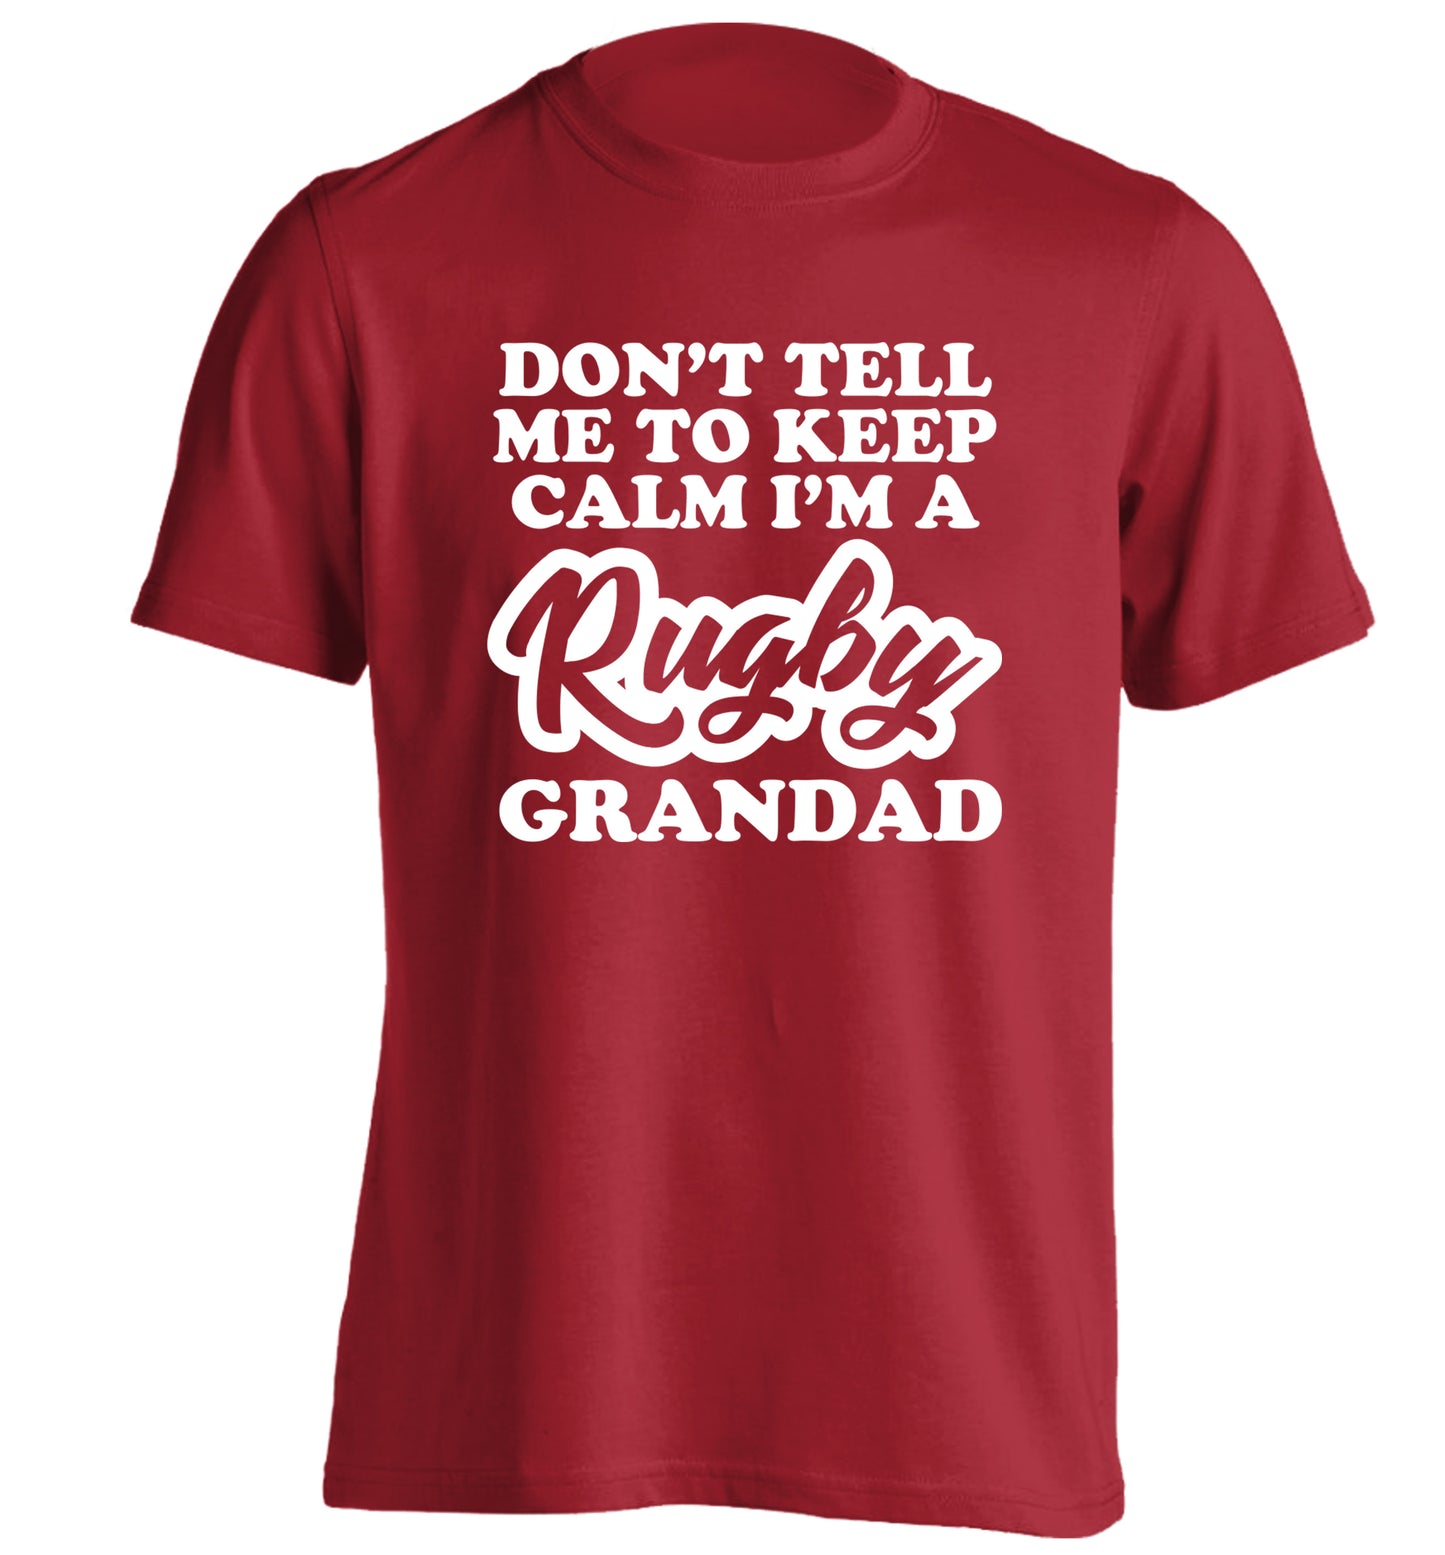 Don't tell me to keep calm I'm a rugby dad adults unisex red Tshirt 2XL